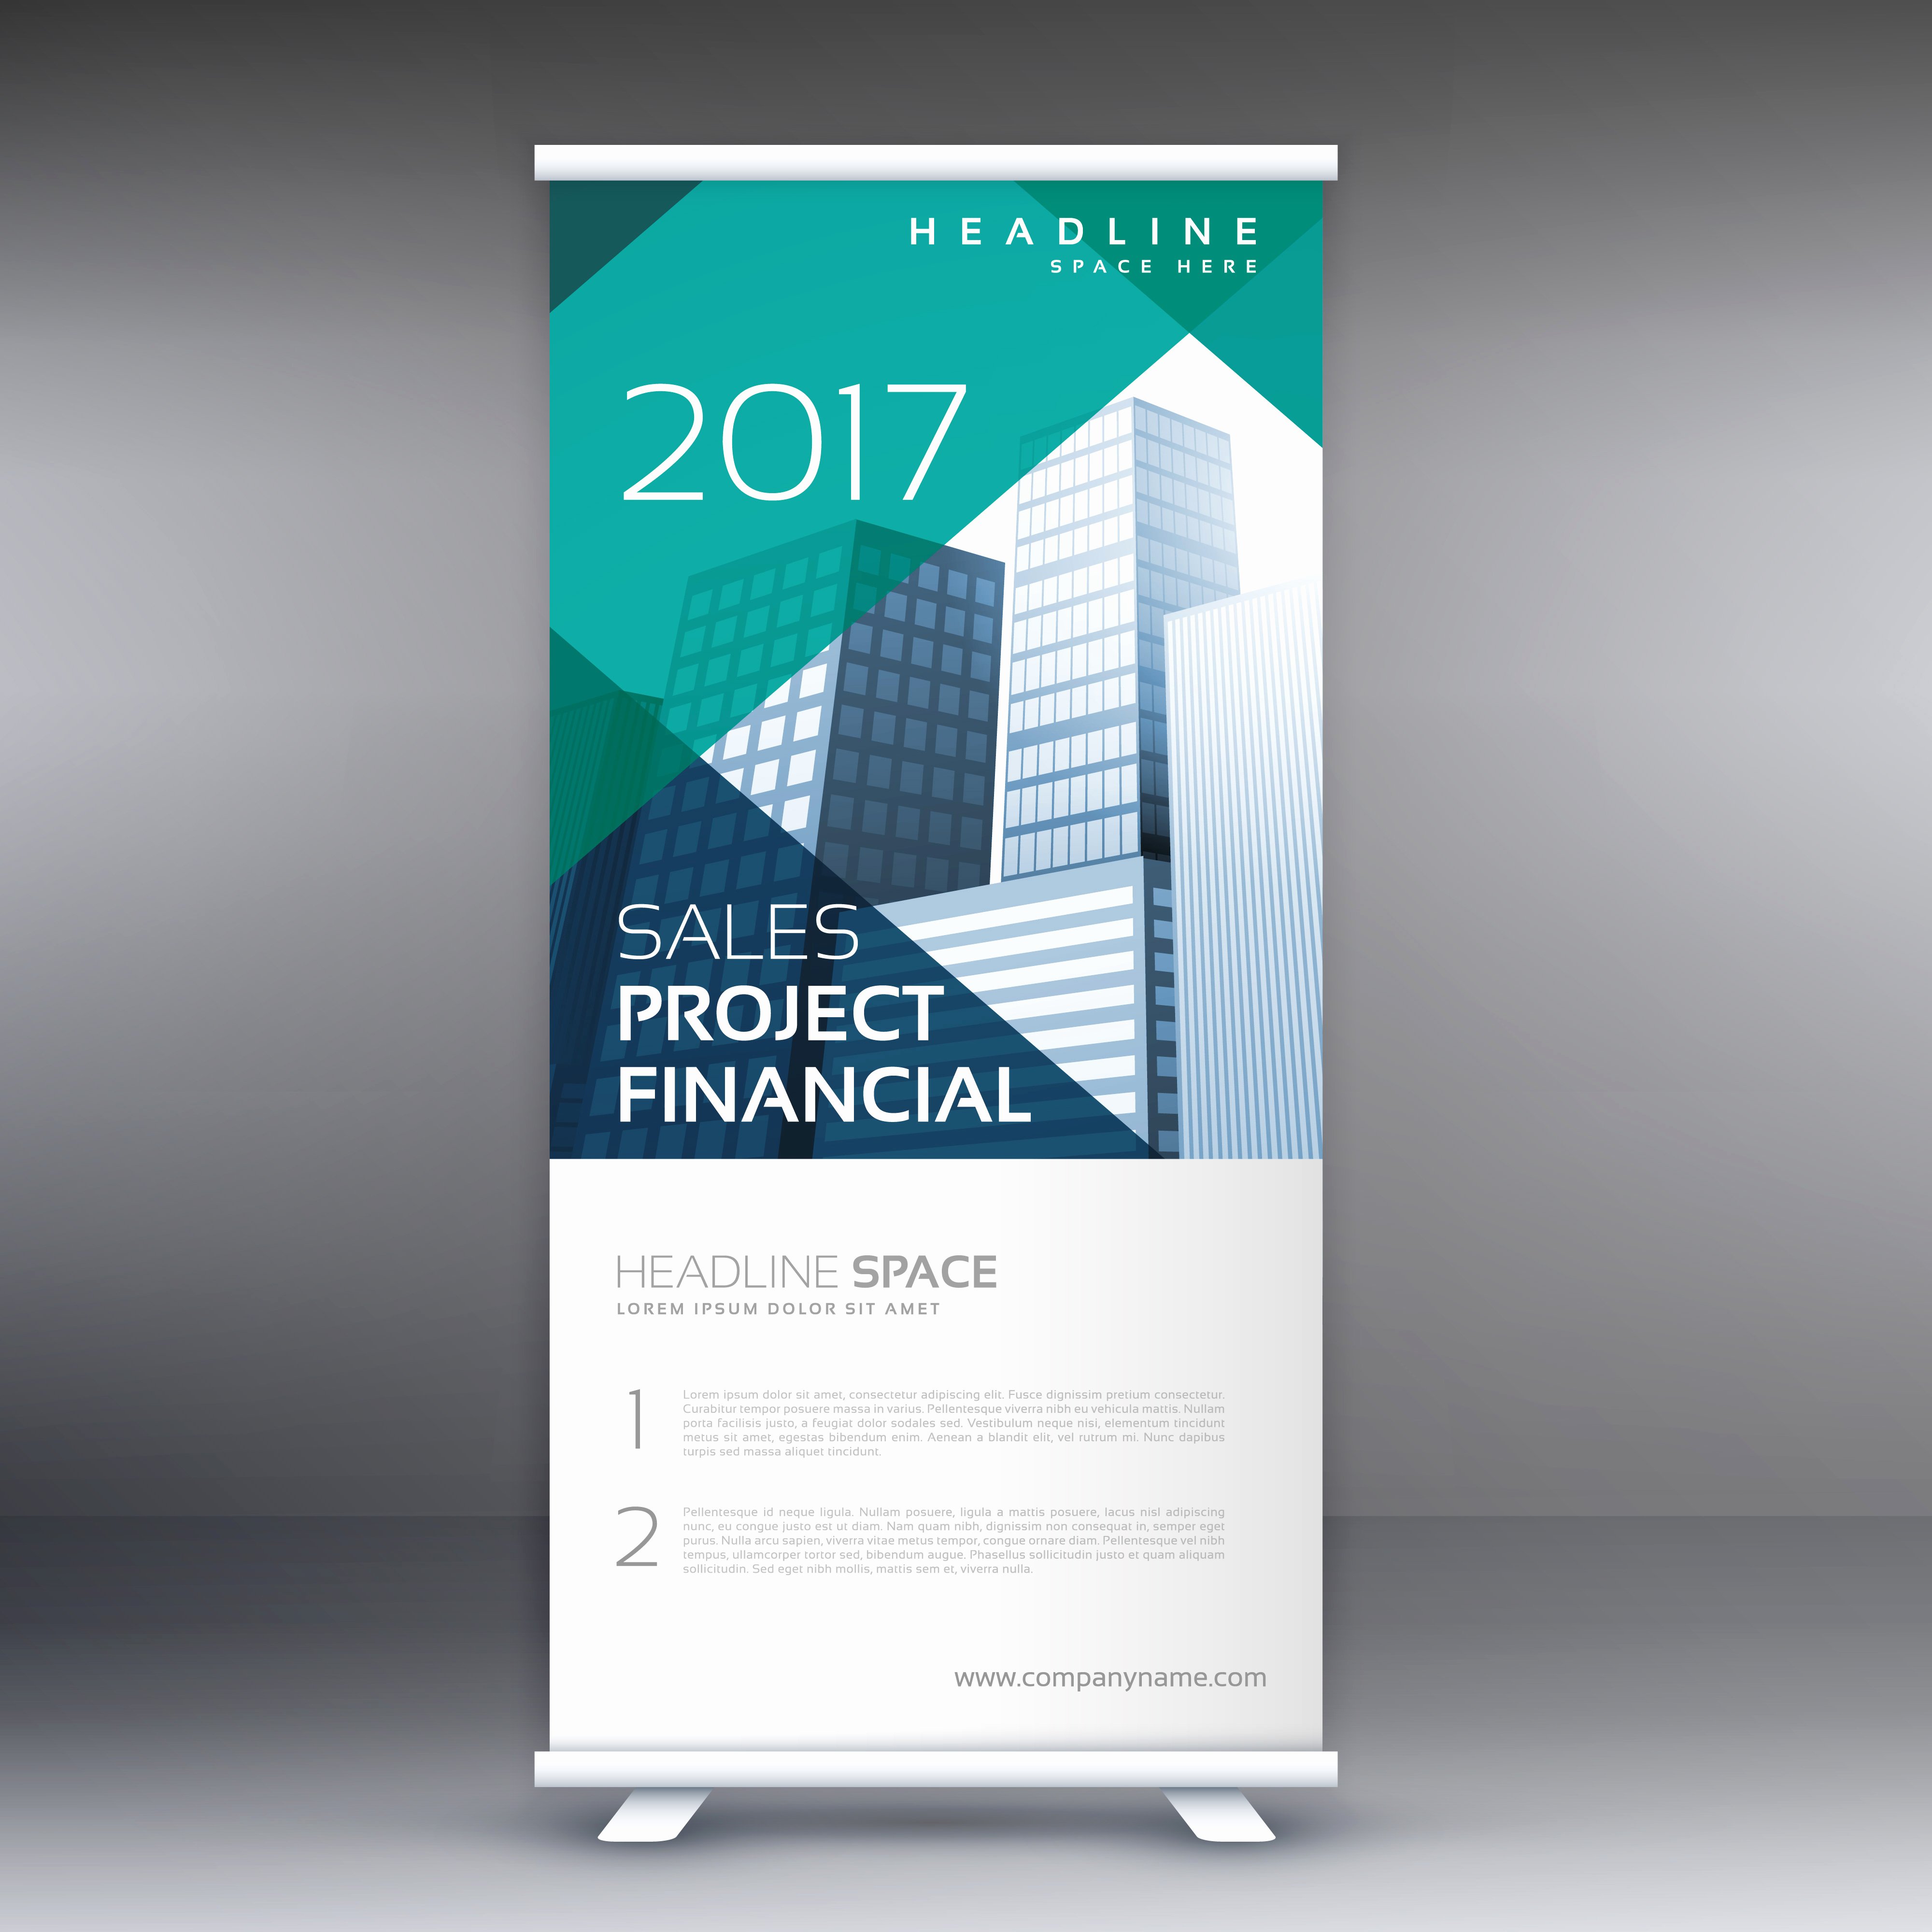 Roll Up Banners Template New Geometric Roll Up Banner Template Download Free Vector